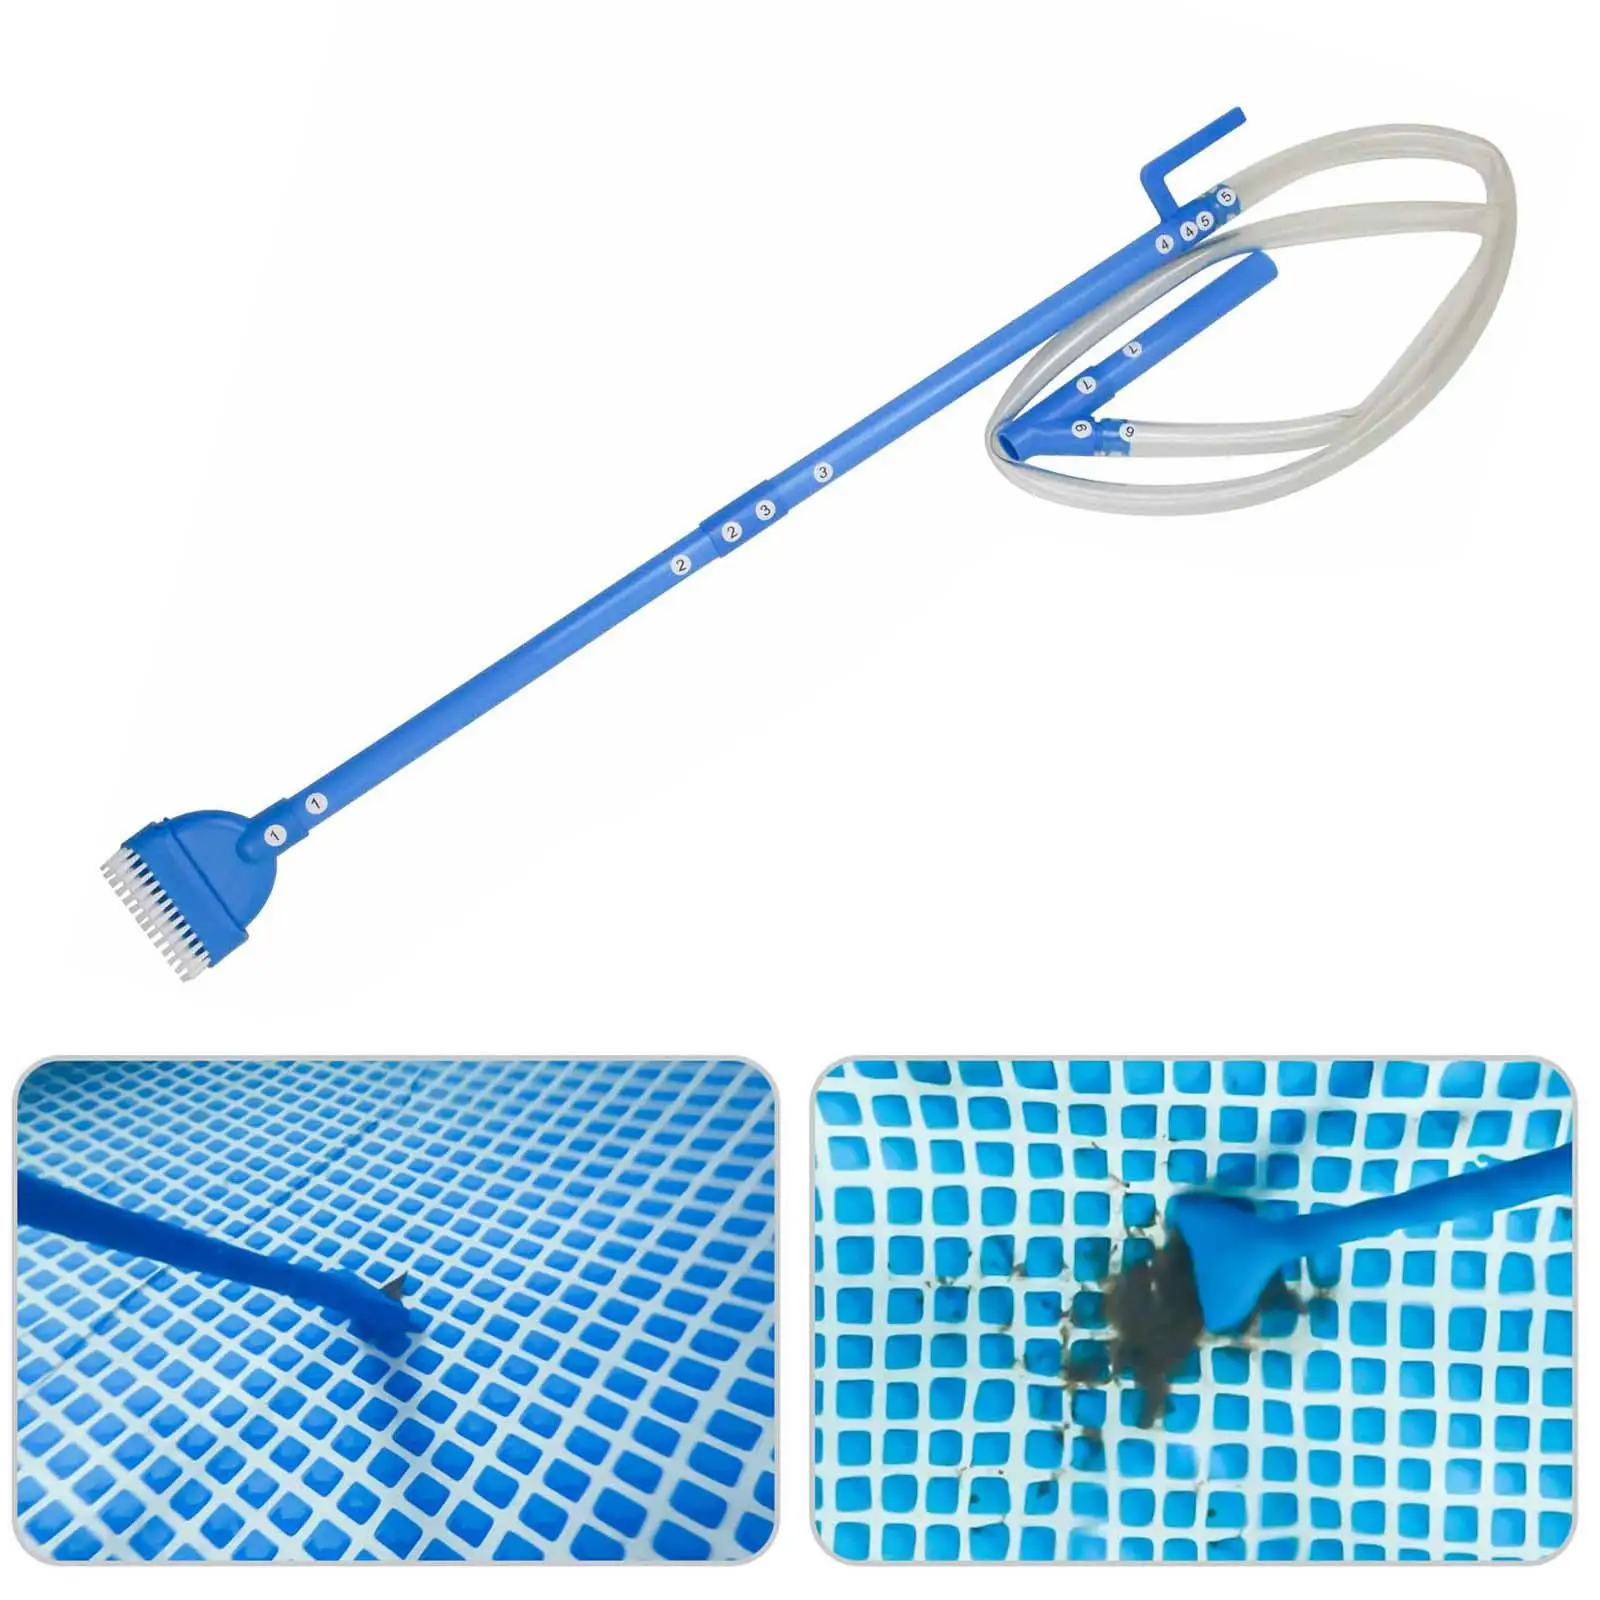 

Pool Hot Tub Cleaner Cordless SPA Vacuum for Small Pools Dirt Small Leaves